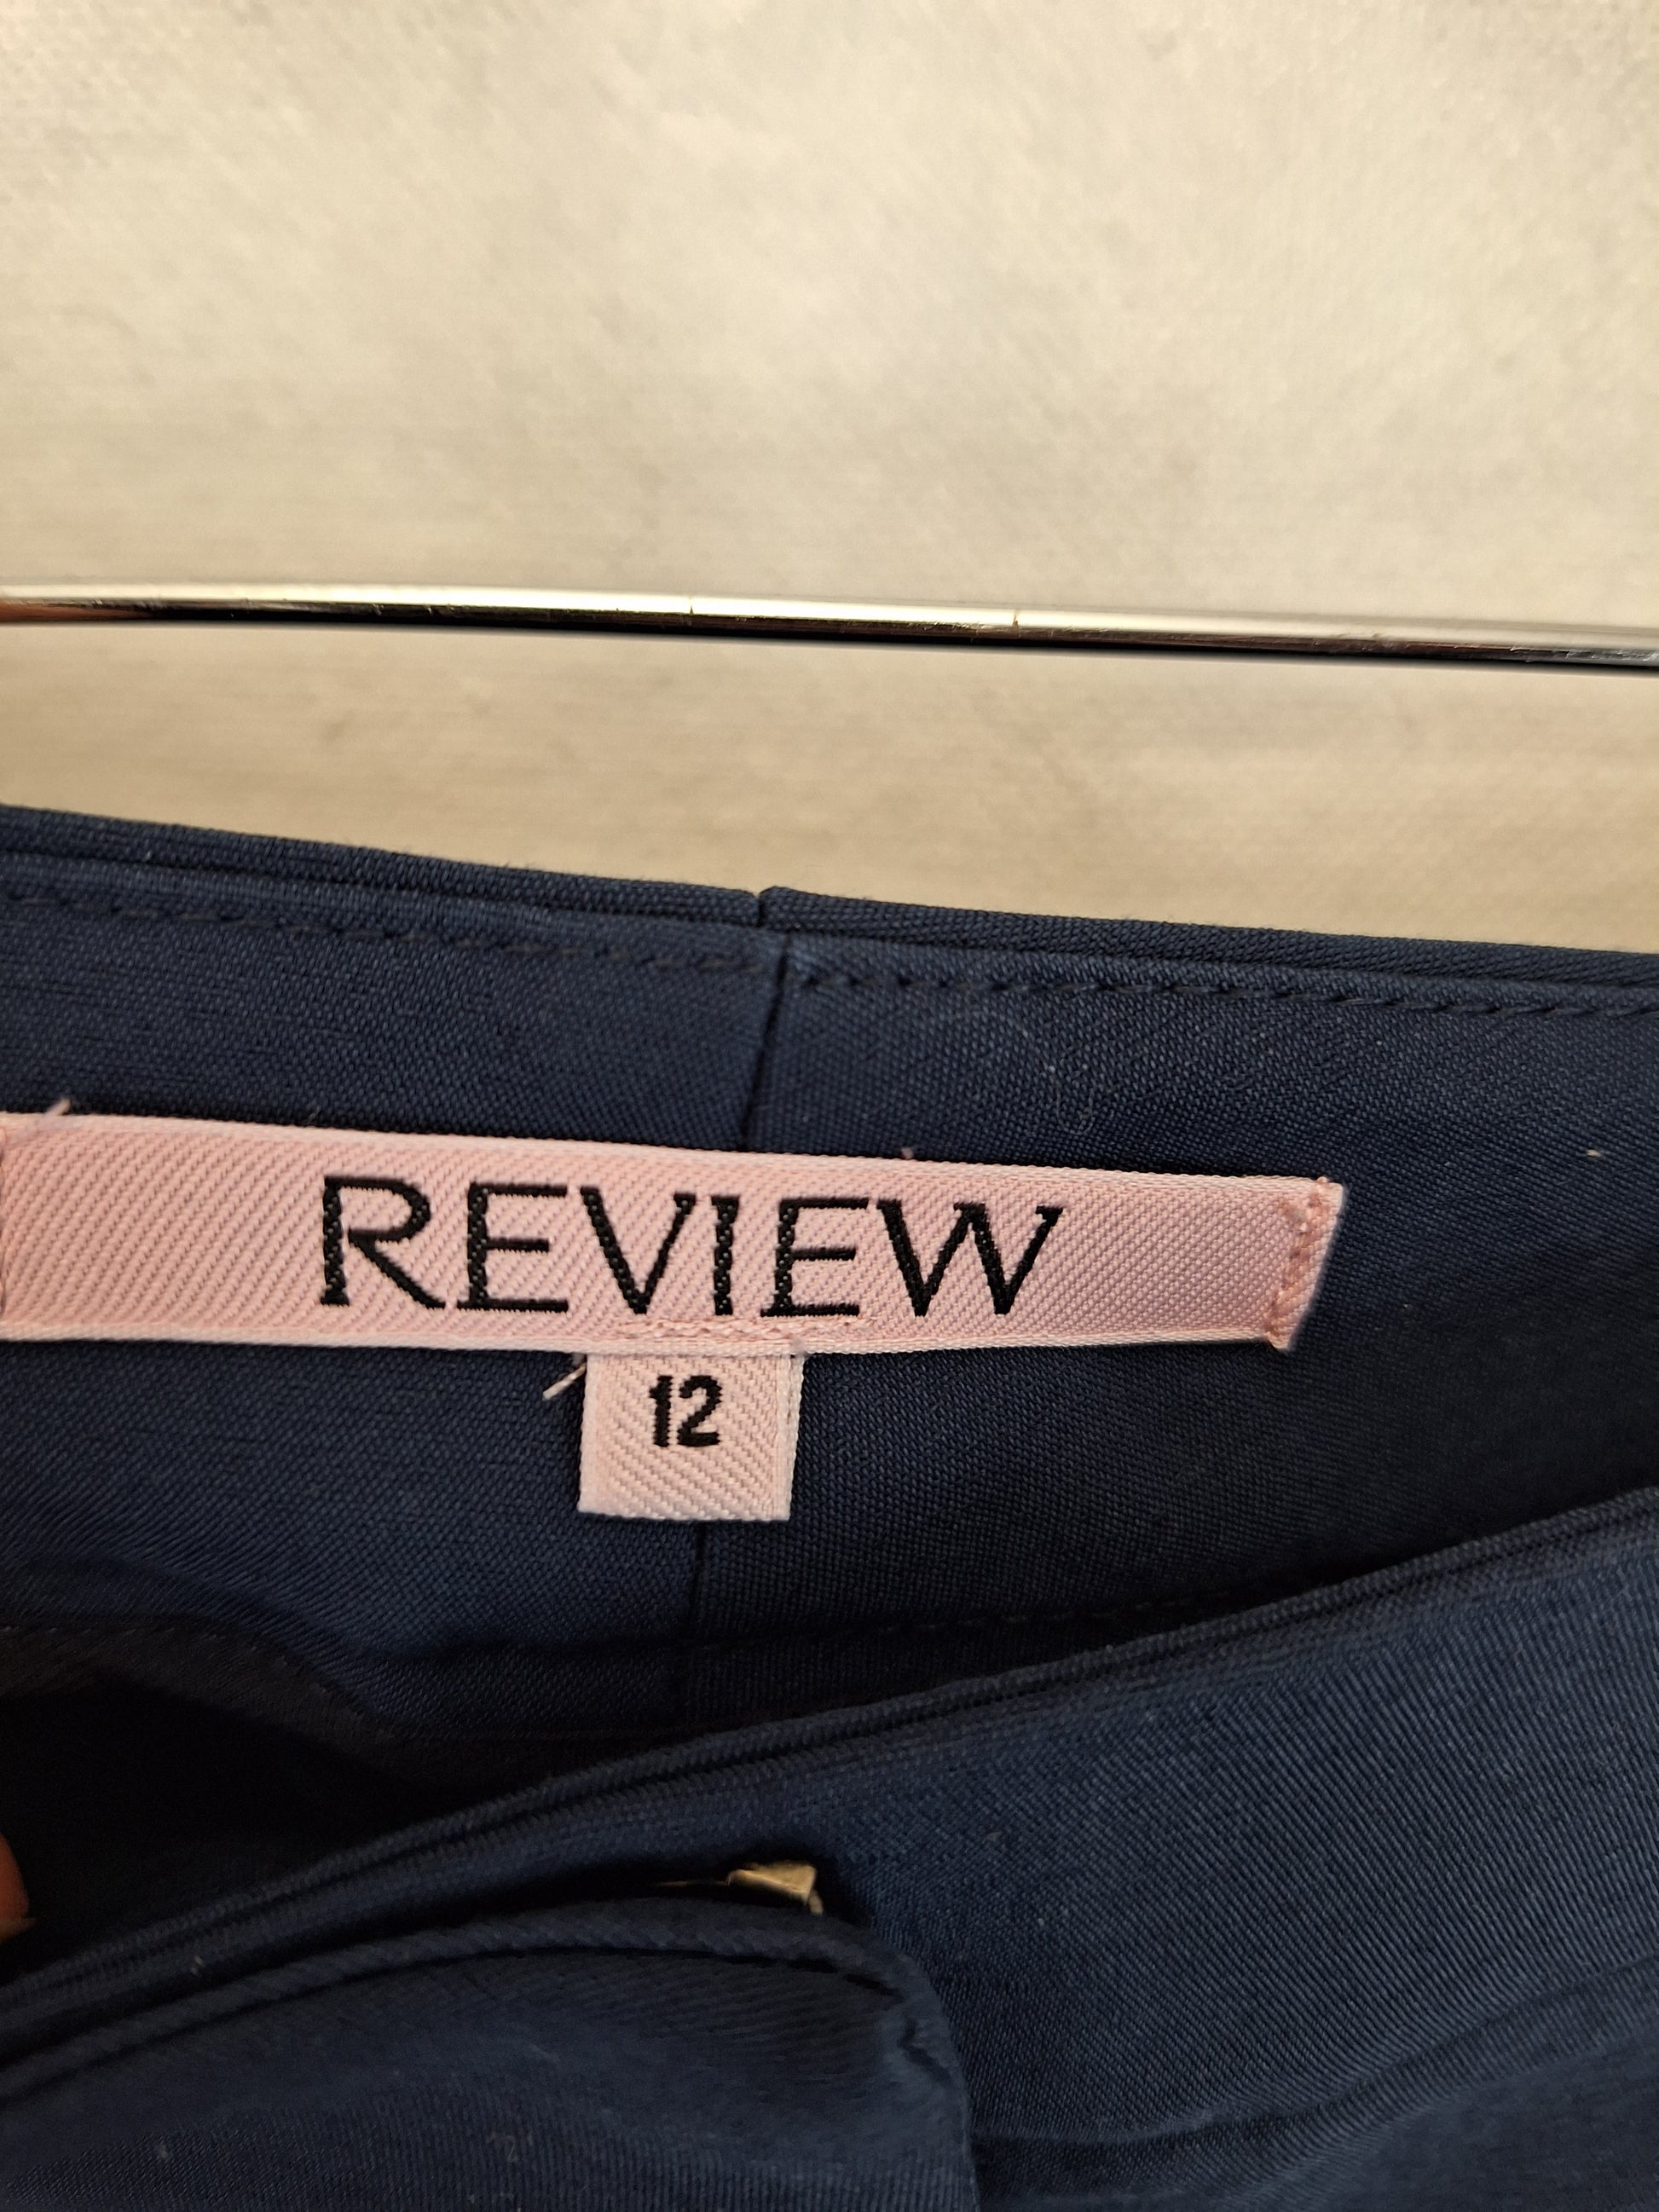 Review Basic Navy Work Pants Size 12 – SwapUp